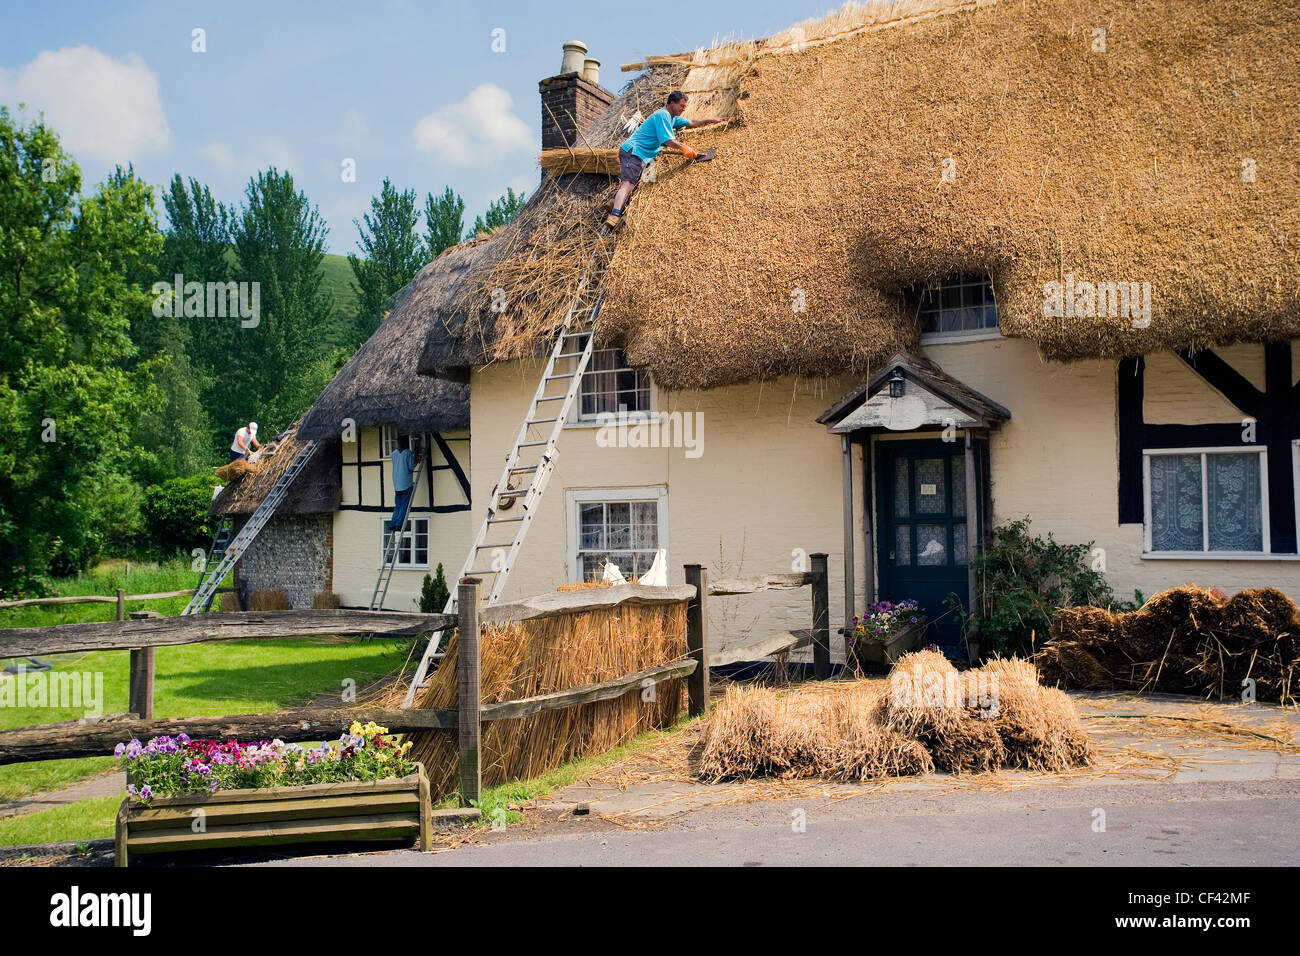 Work to replace a traditional thatched roof on a cottage. Stock Photo